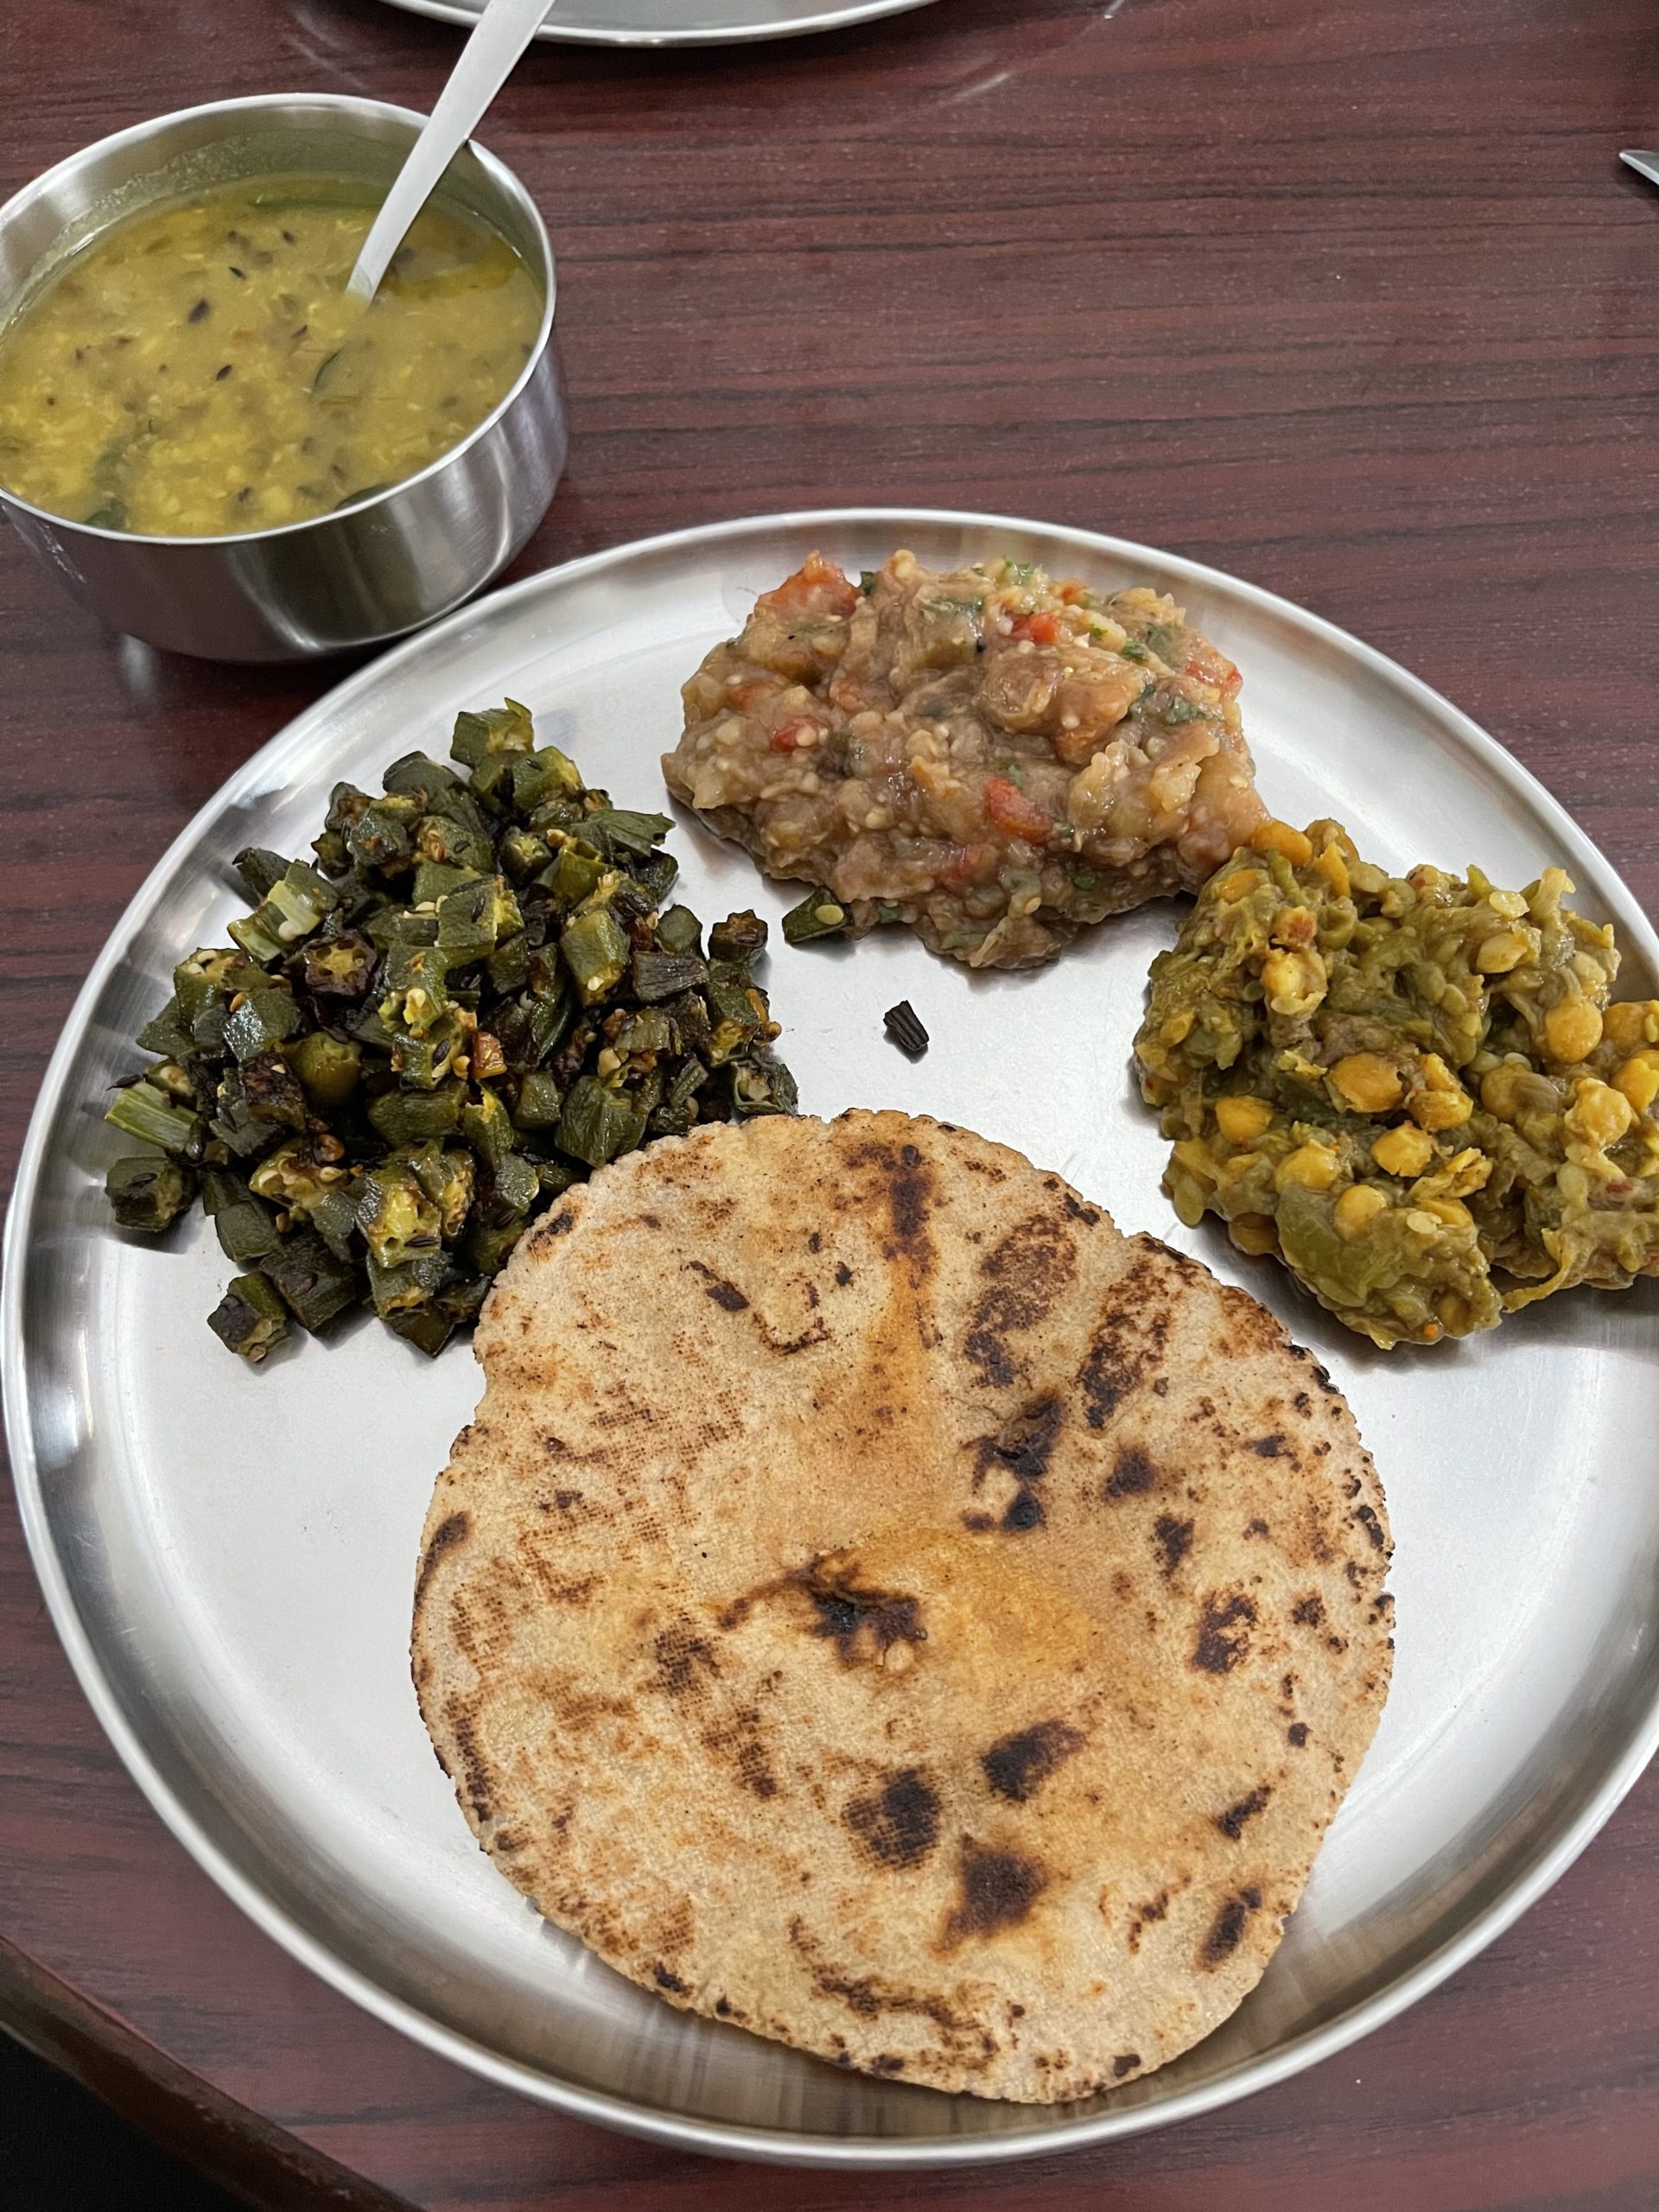 Delicacies from India